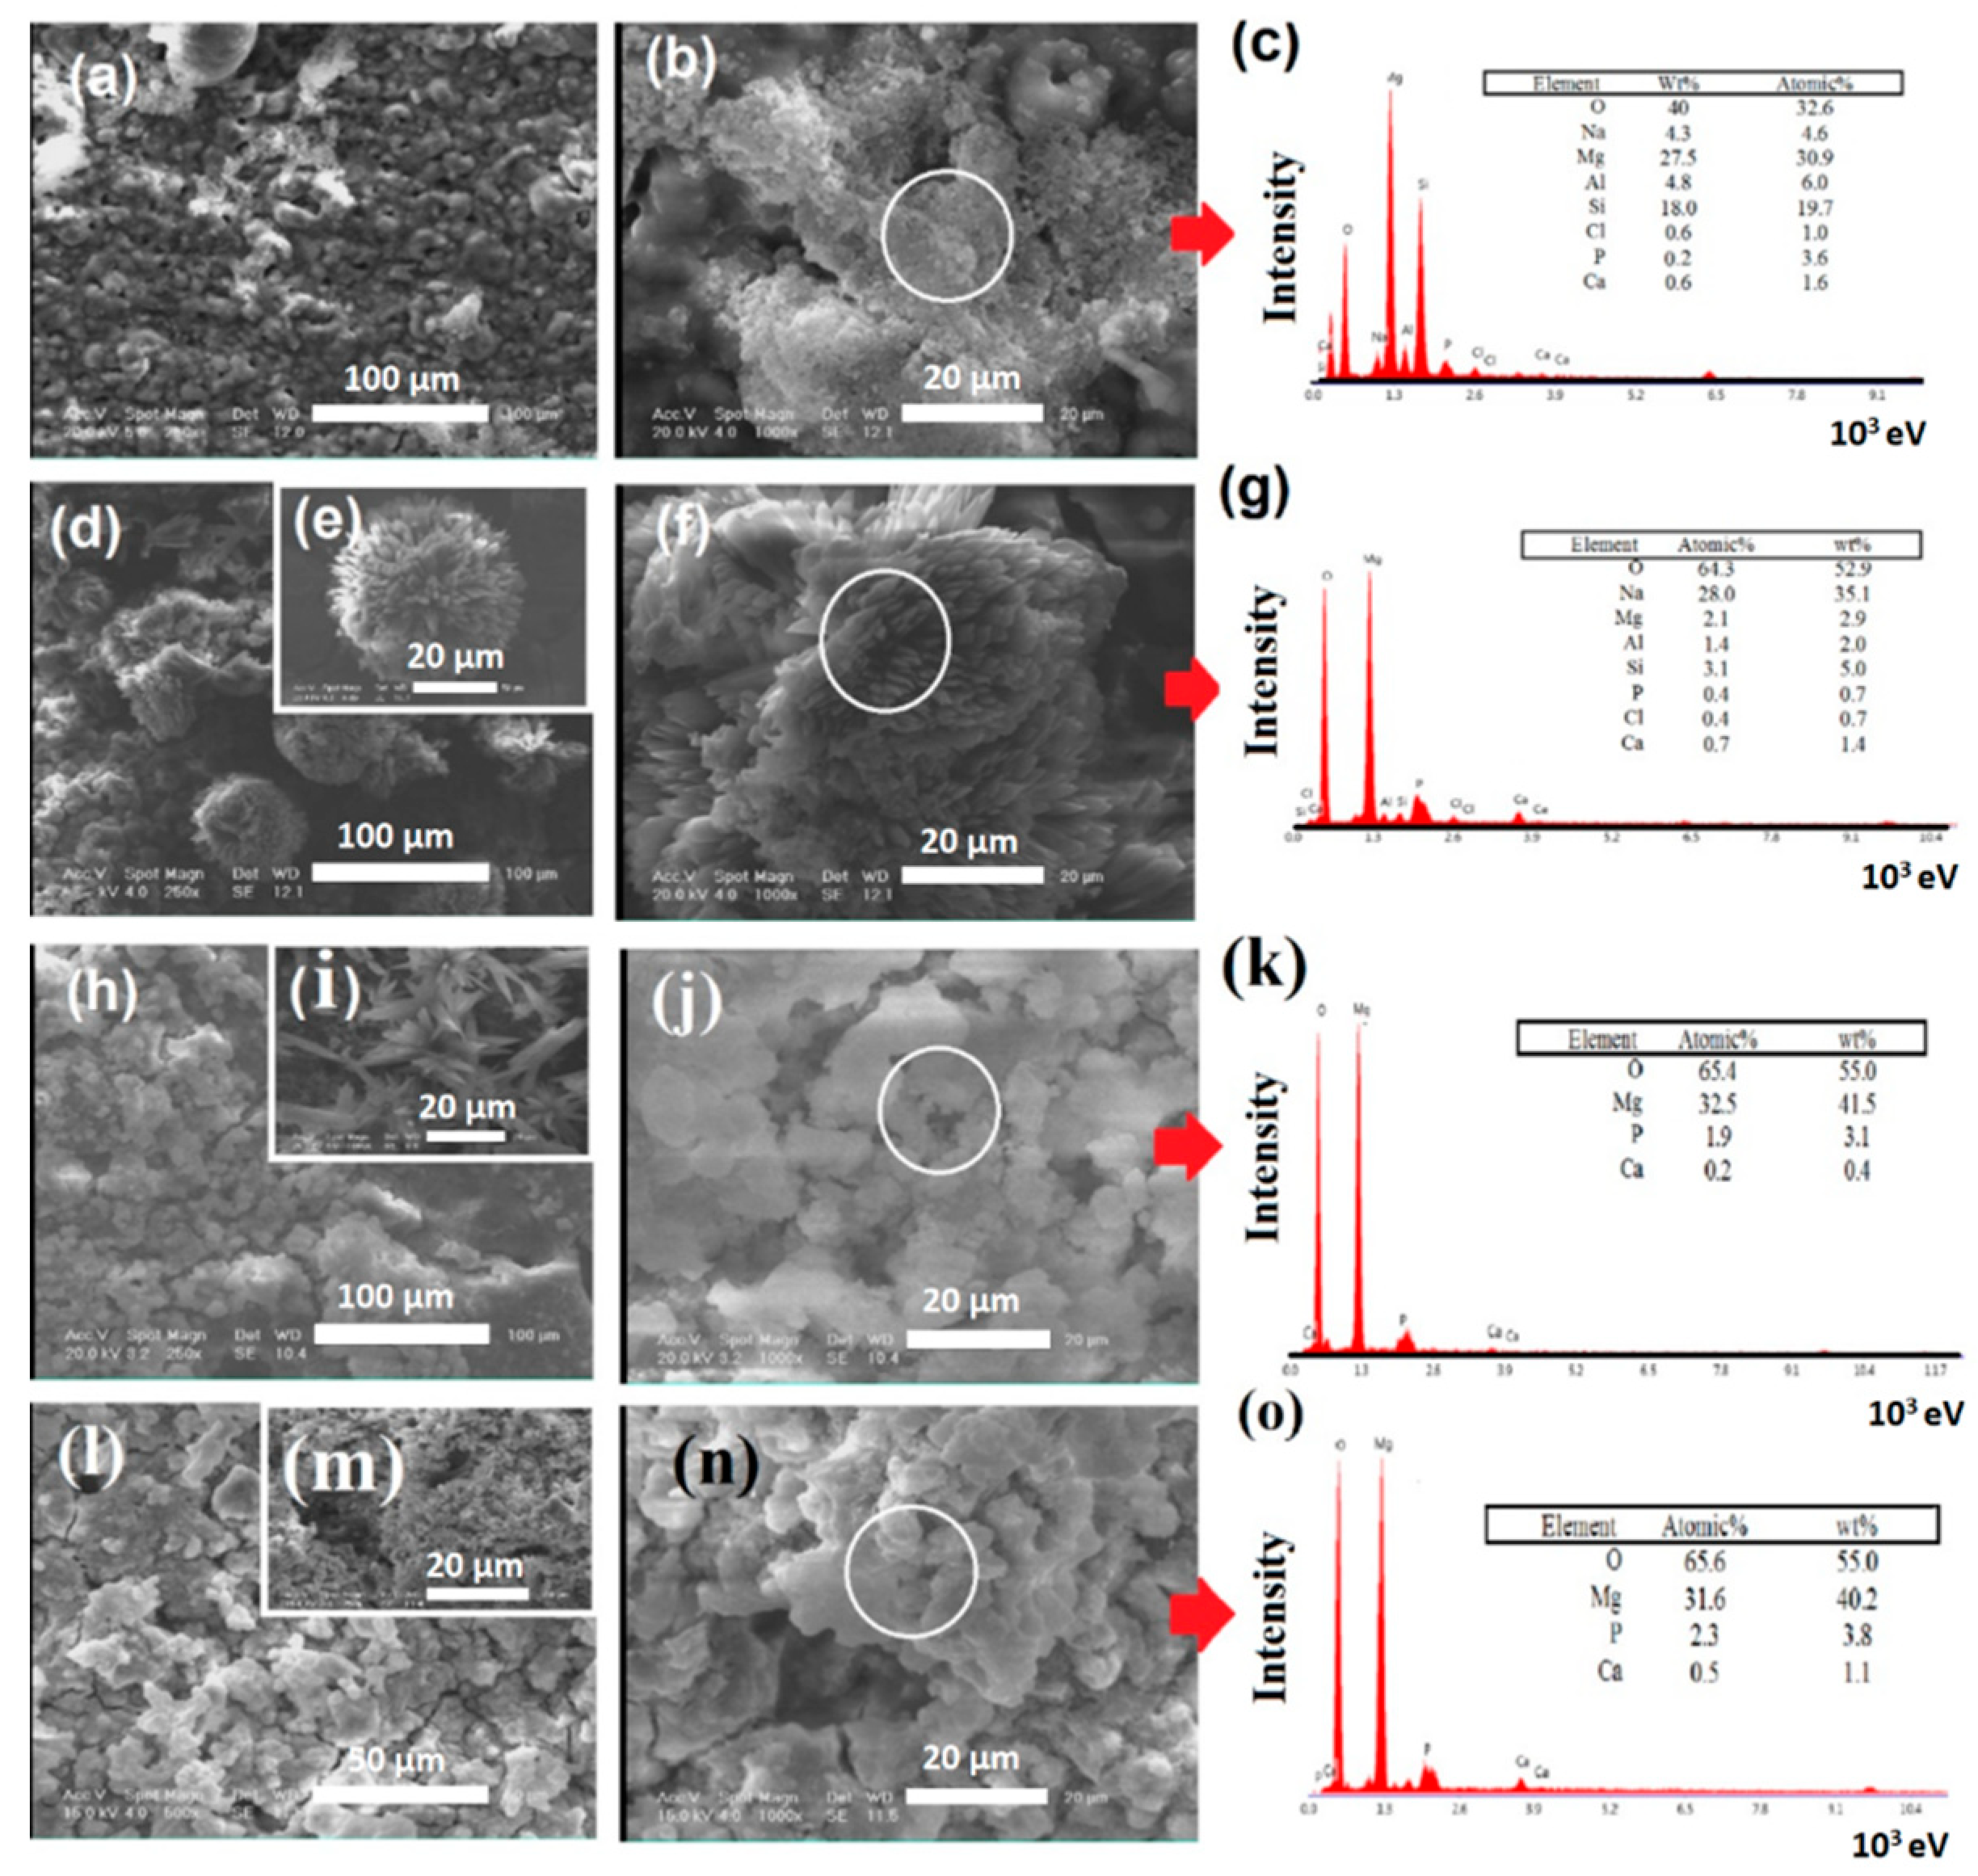 Coatings Free Full Text Bioactivity Behavior Evaluation Of Pcl Chitosan Nanobaghdadite Coating On Az91 Magnesium Alloy In Simulated Body Fluid Html